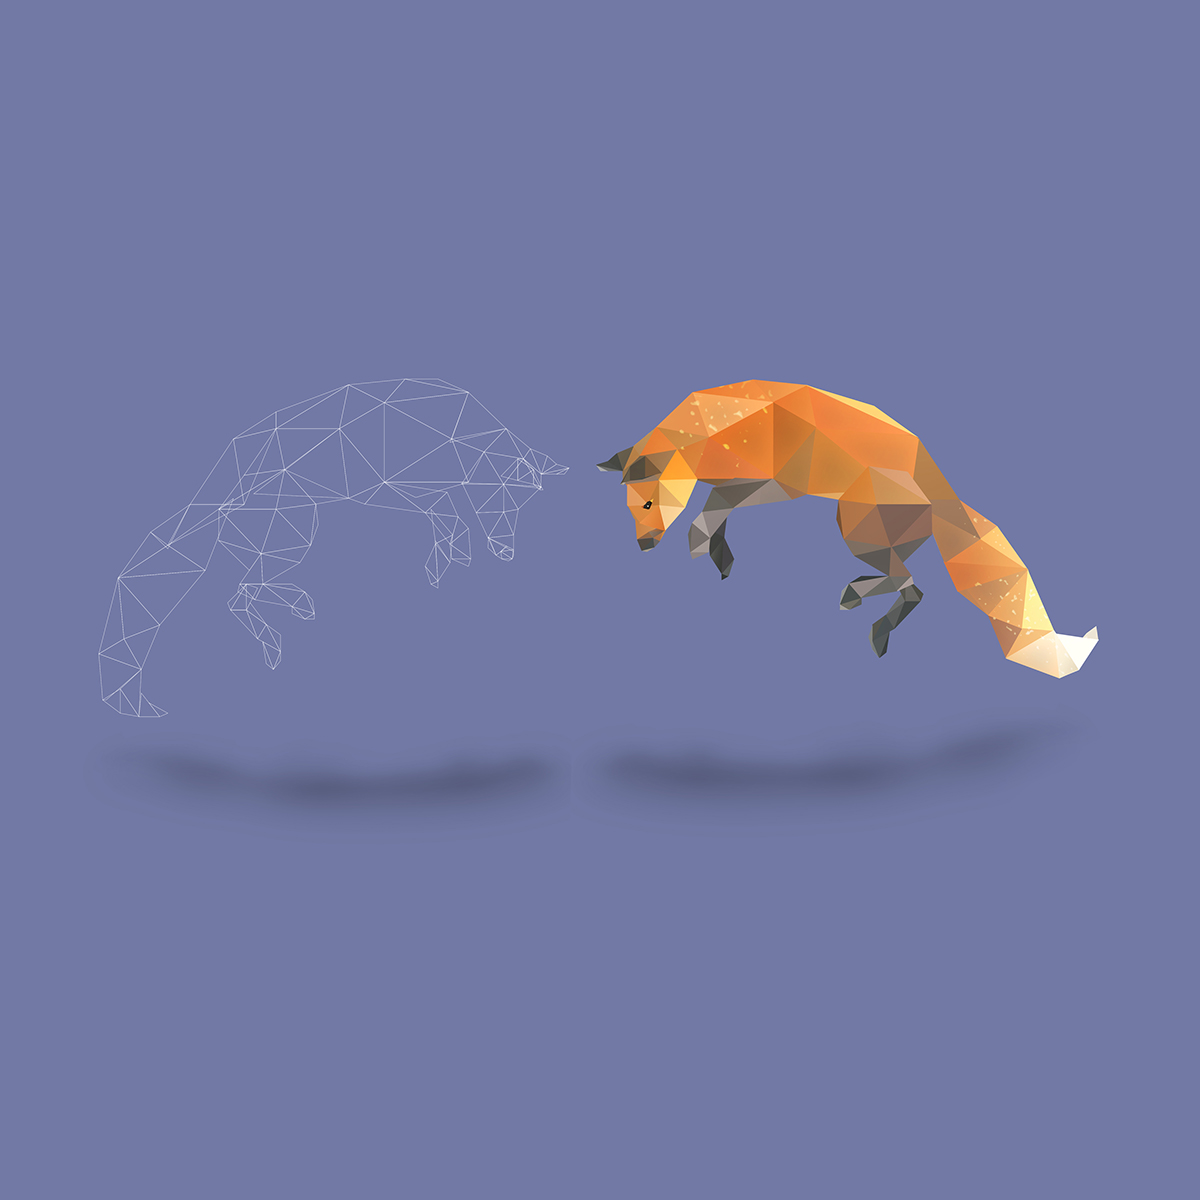 inspire animals FOX red fox photoshop vector Low Poly Nature low polygon Illustrator Creative Cloud Behance brand